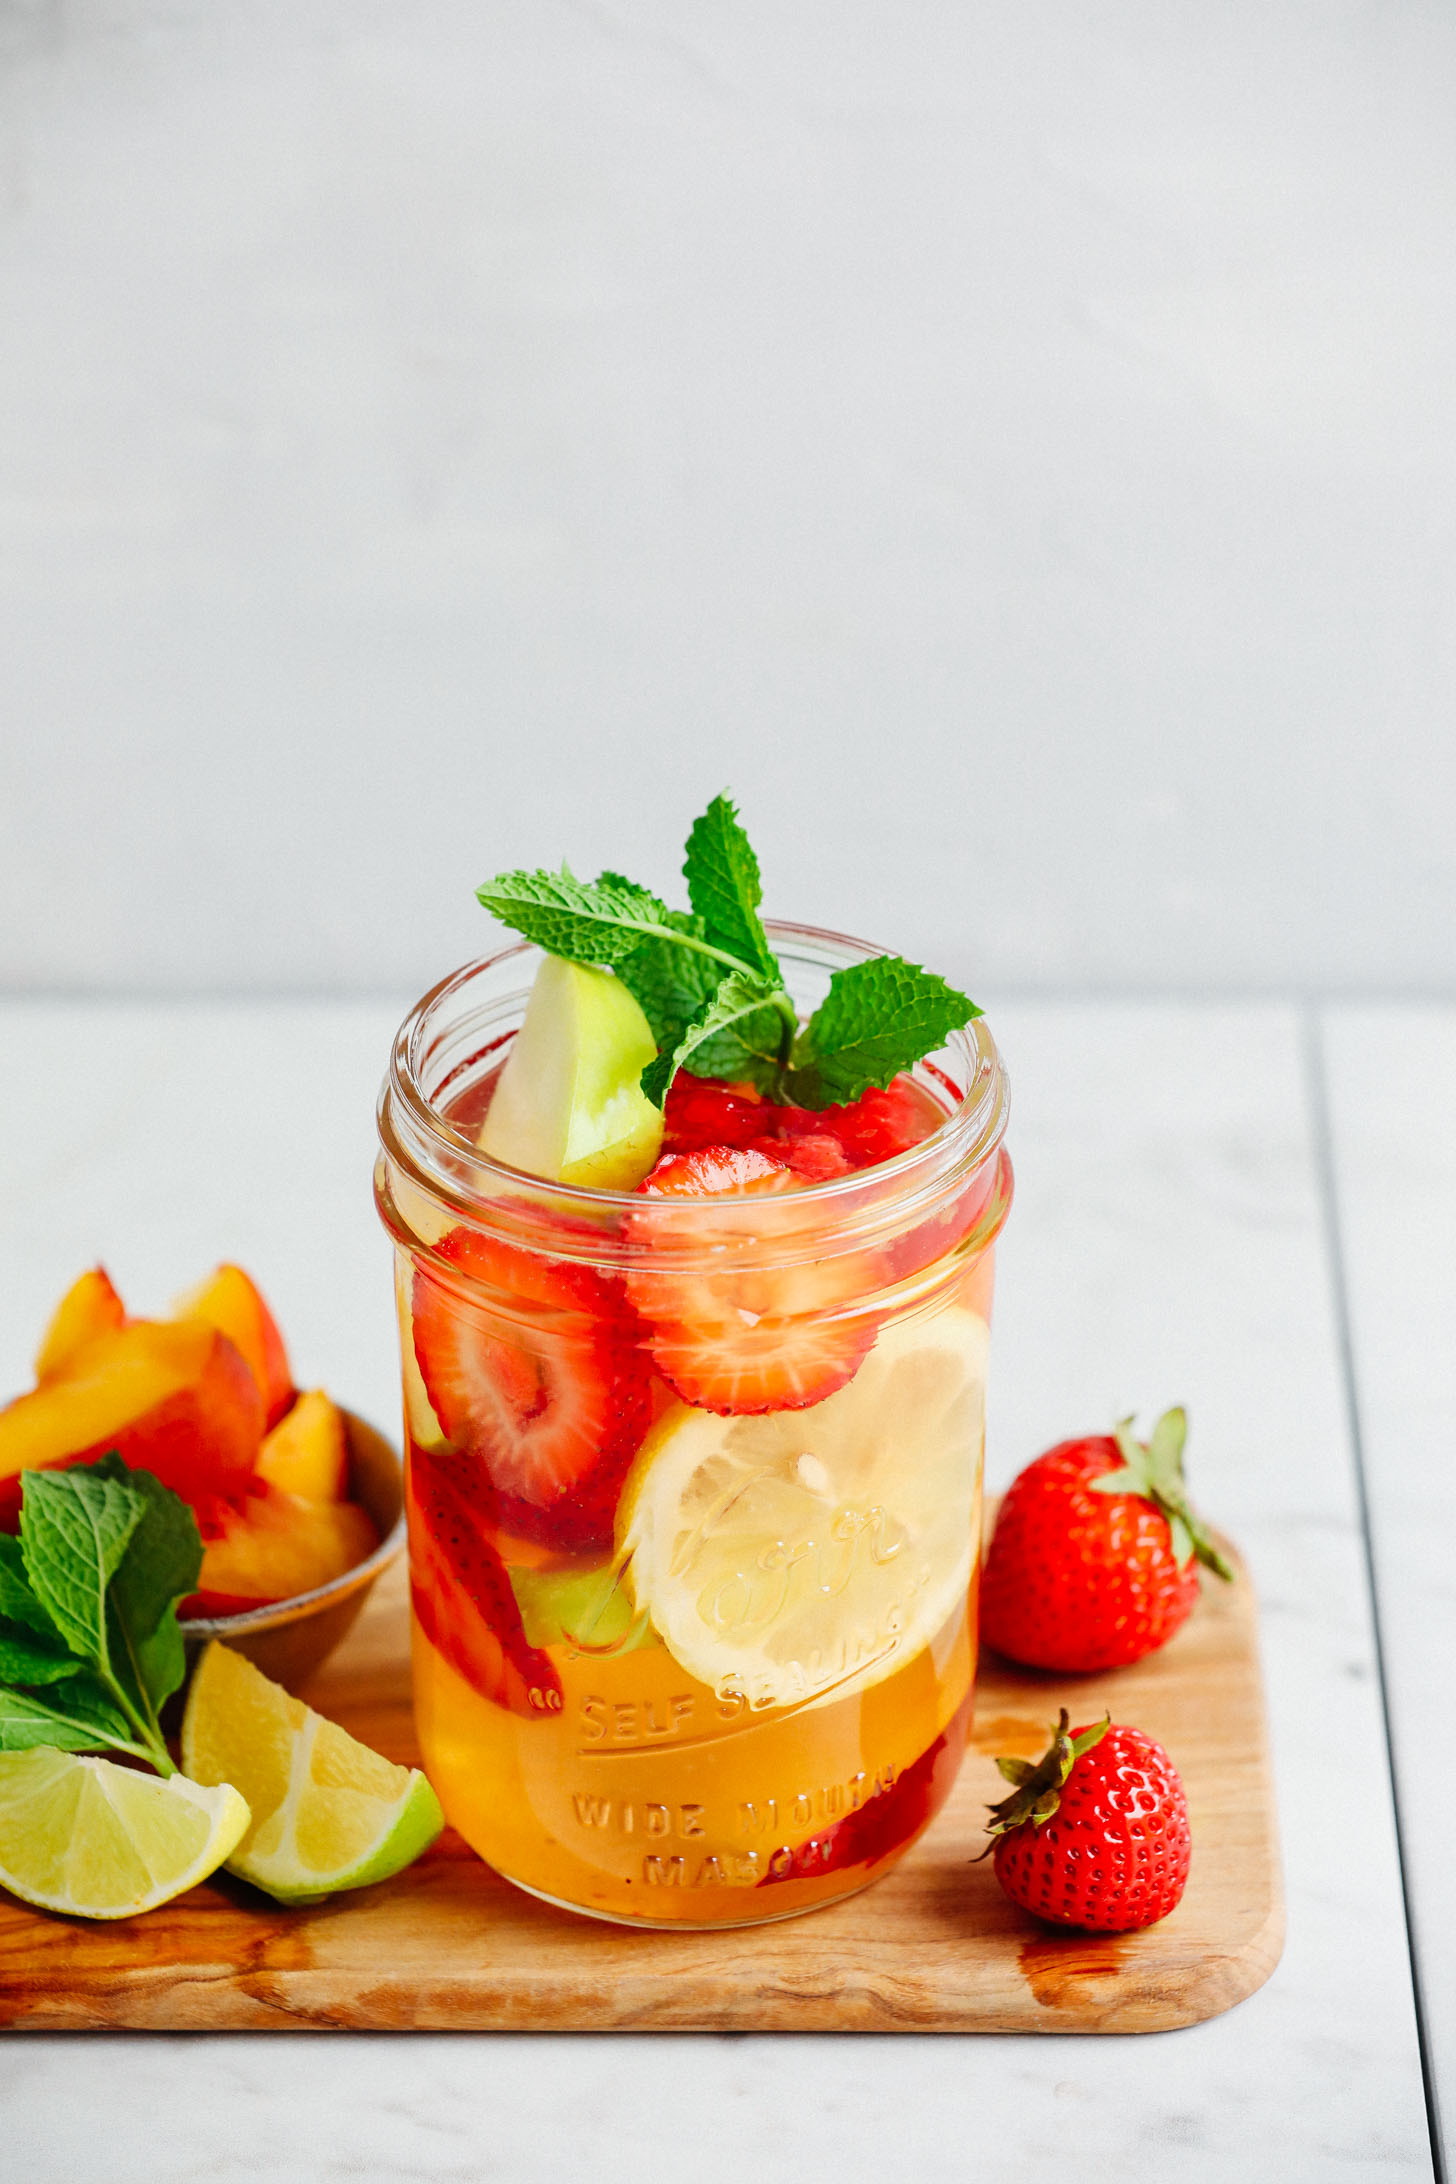 Traditional White Sangria Minimalist Baker Recipes,How To Make Long Island Iced Tea At Home